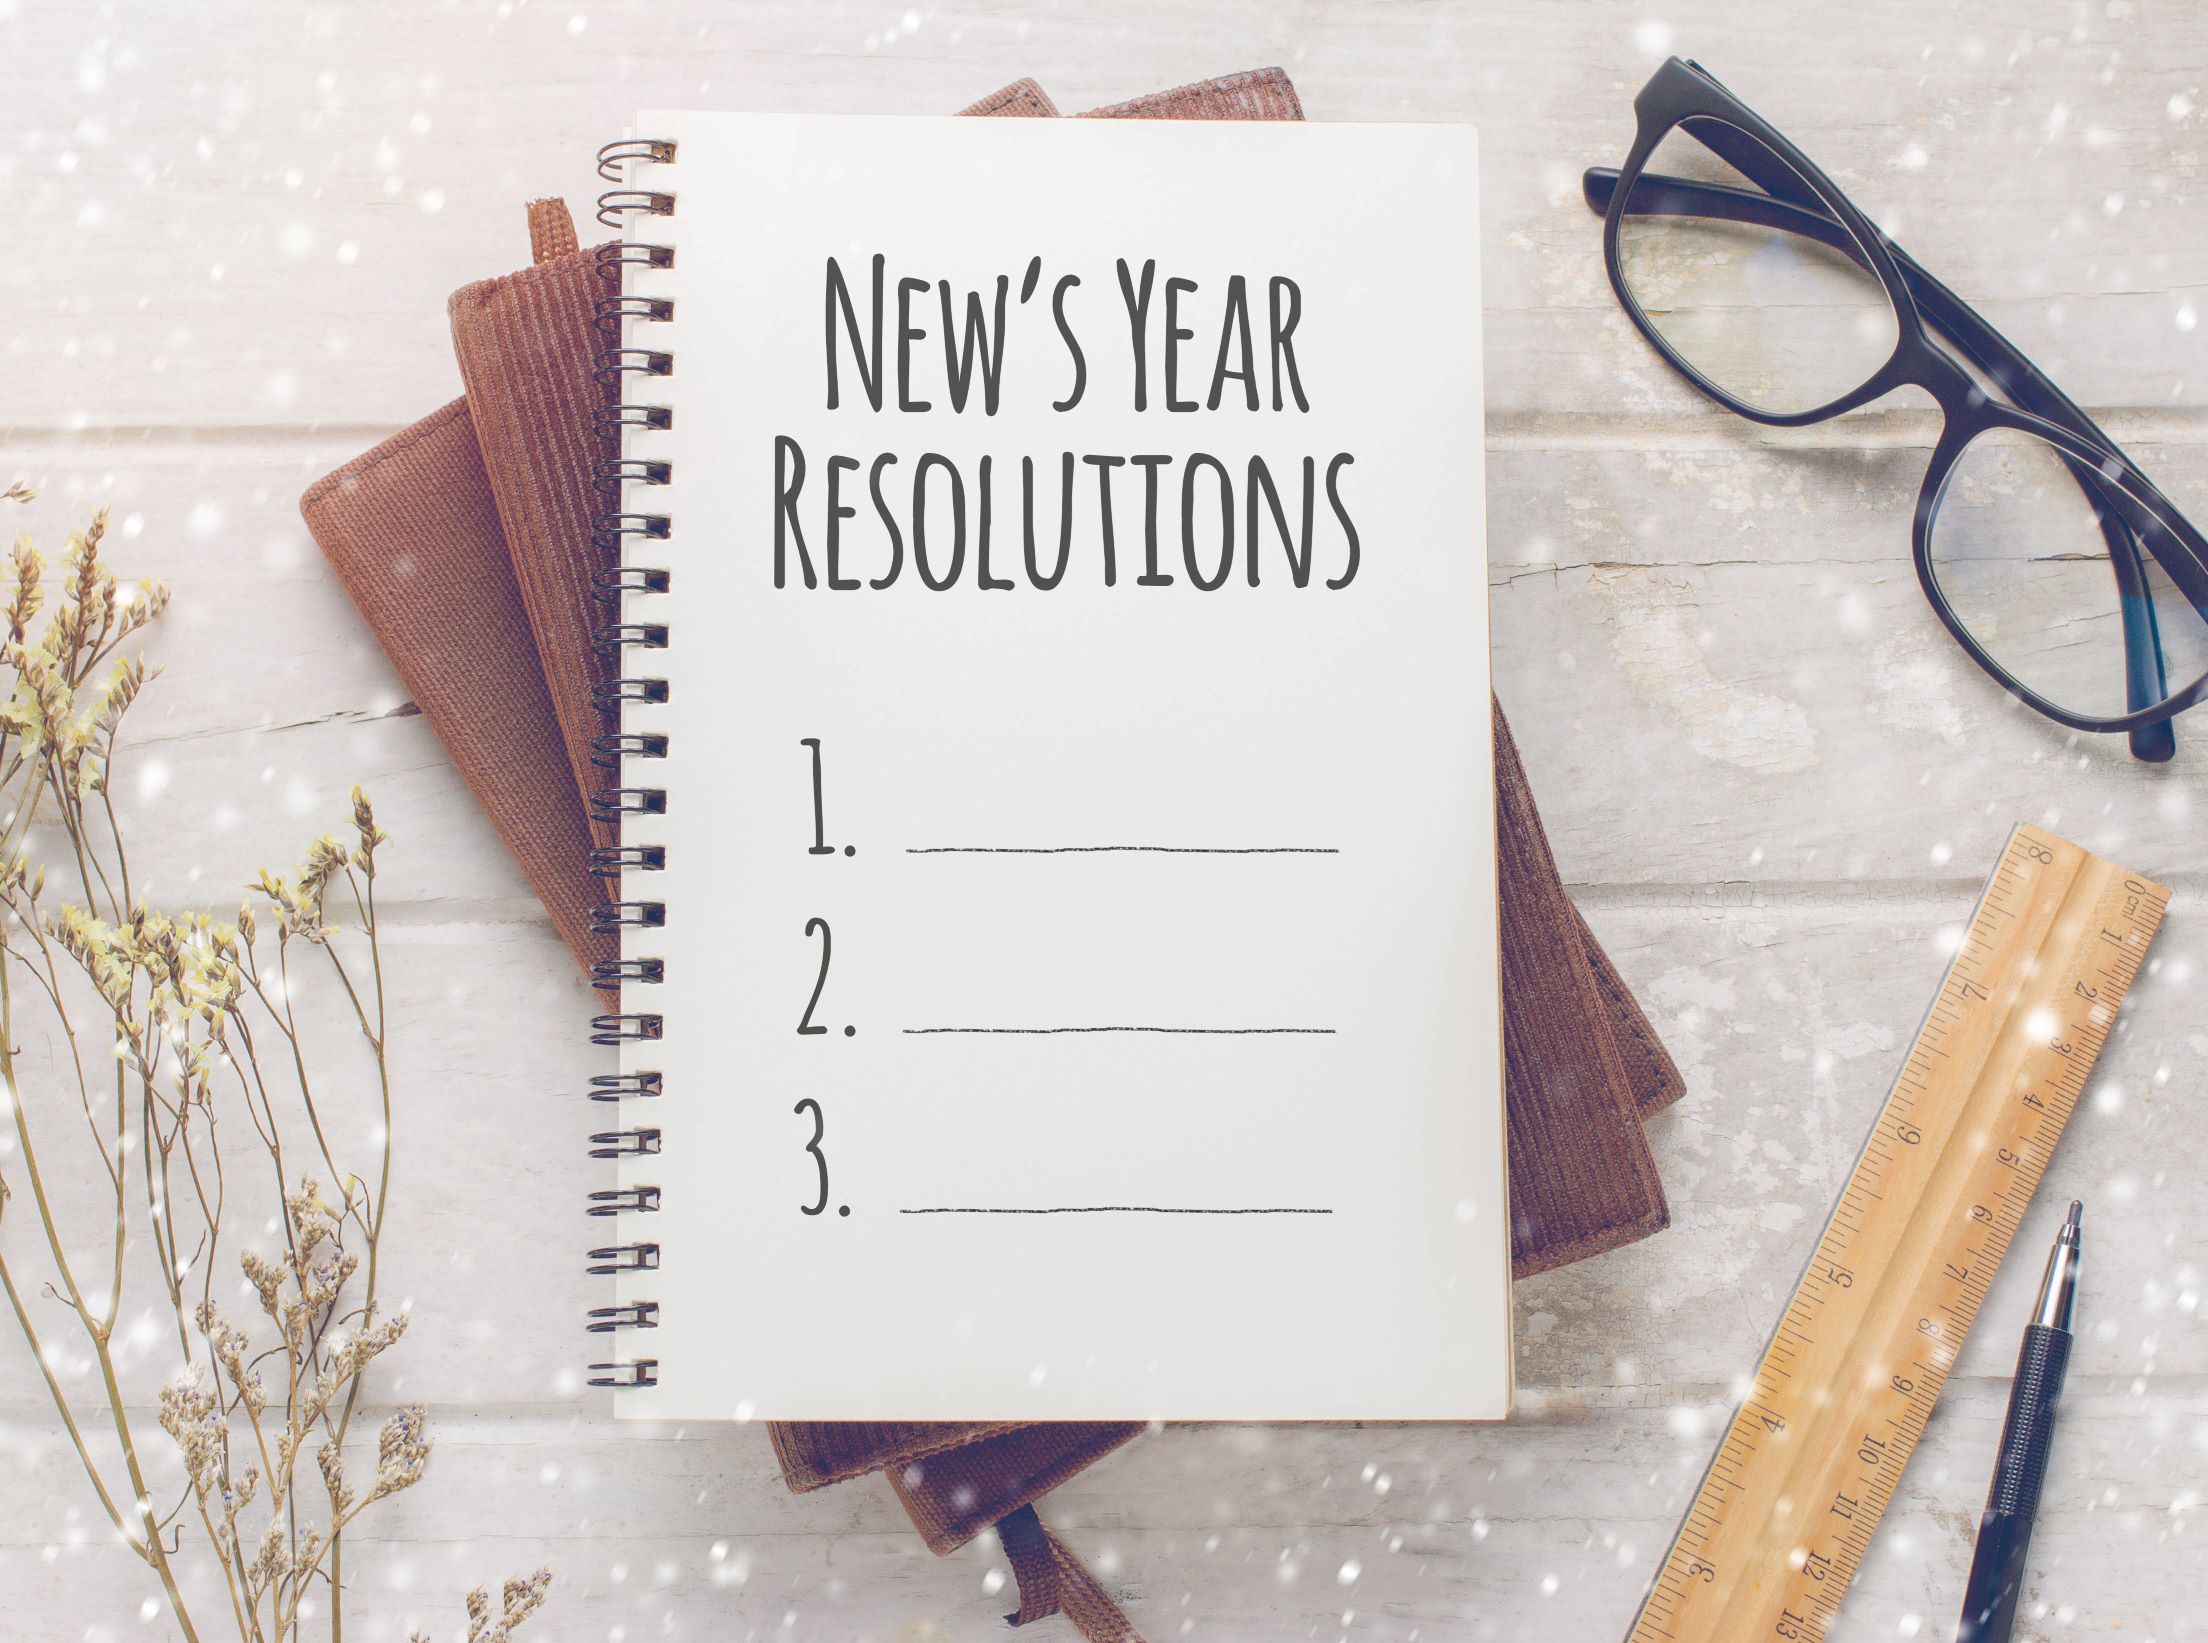 New Year’s Resolution: Get That Estate Plan Done